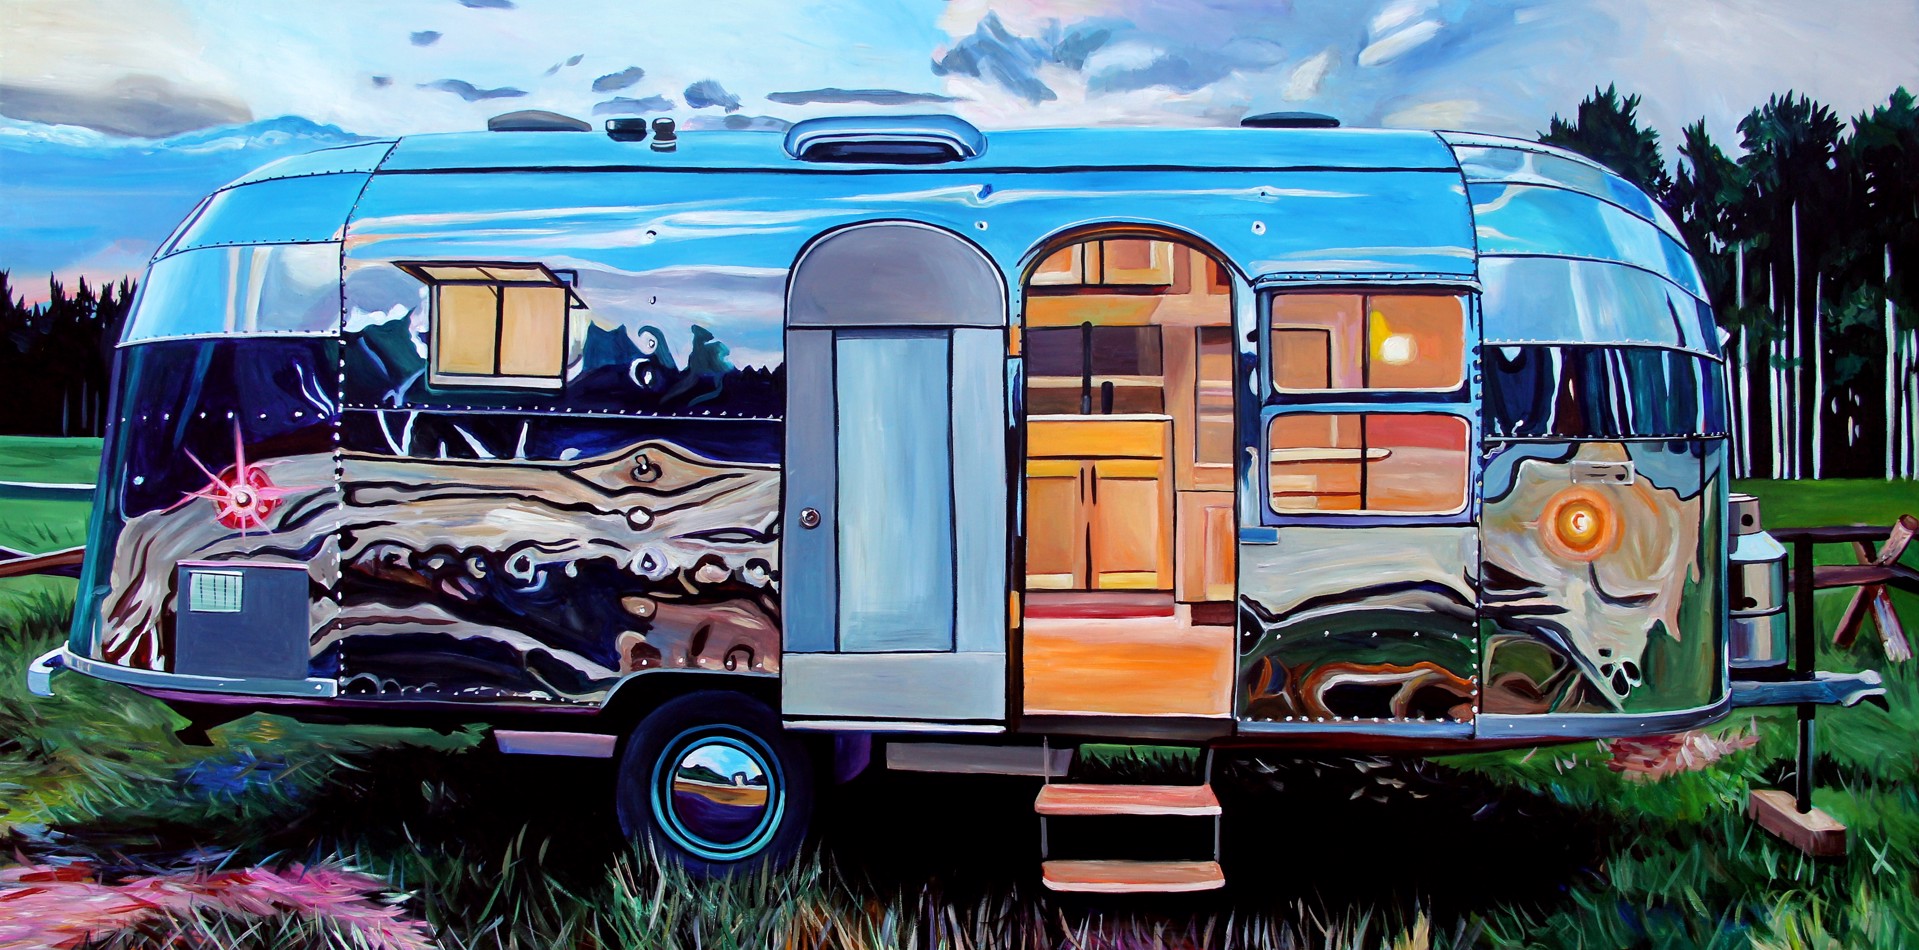 Airstream Glow by Taralee Guild